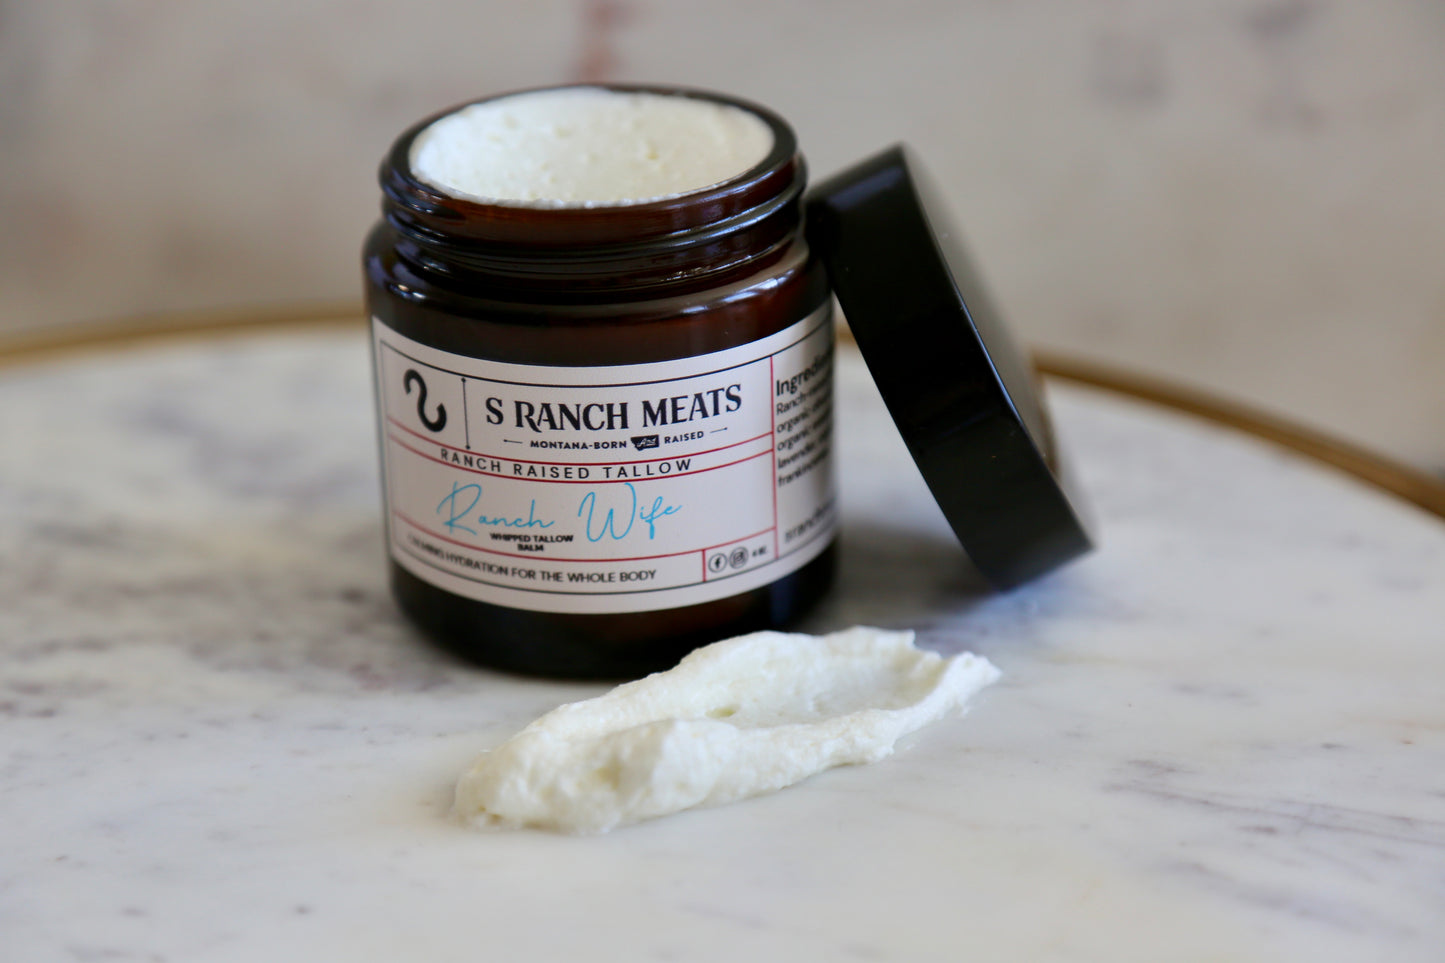 Ranch Wife Whipped Tallow Balm